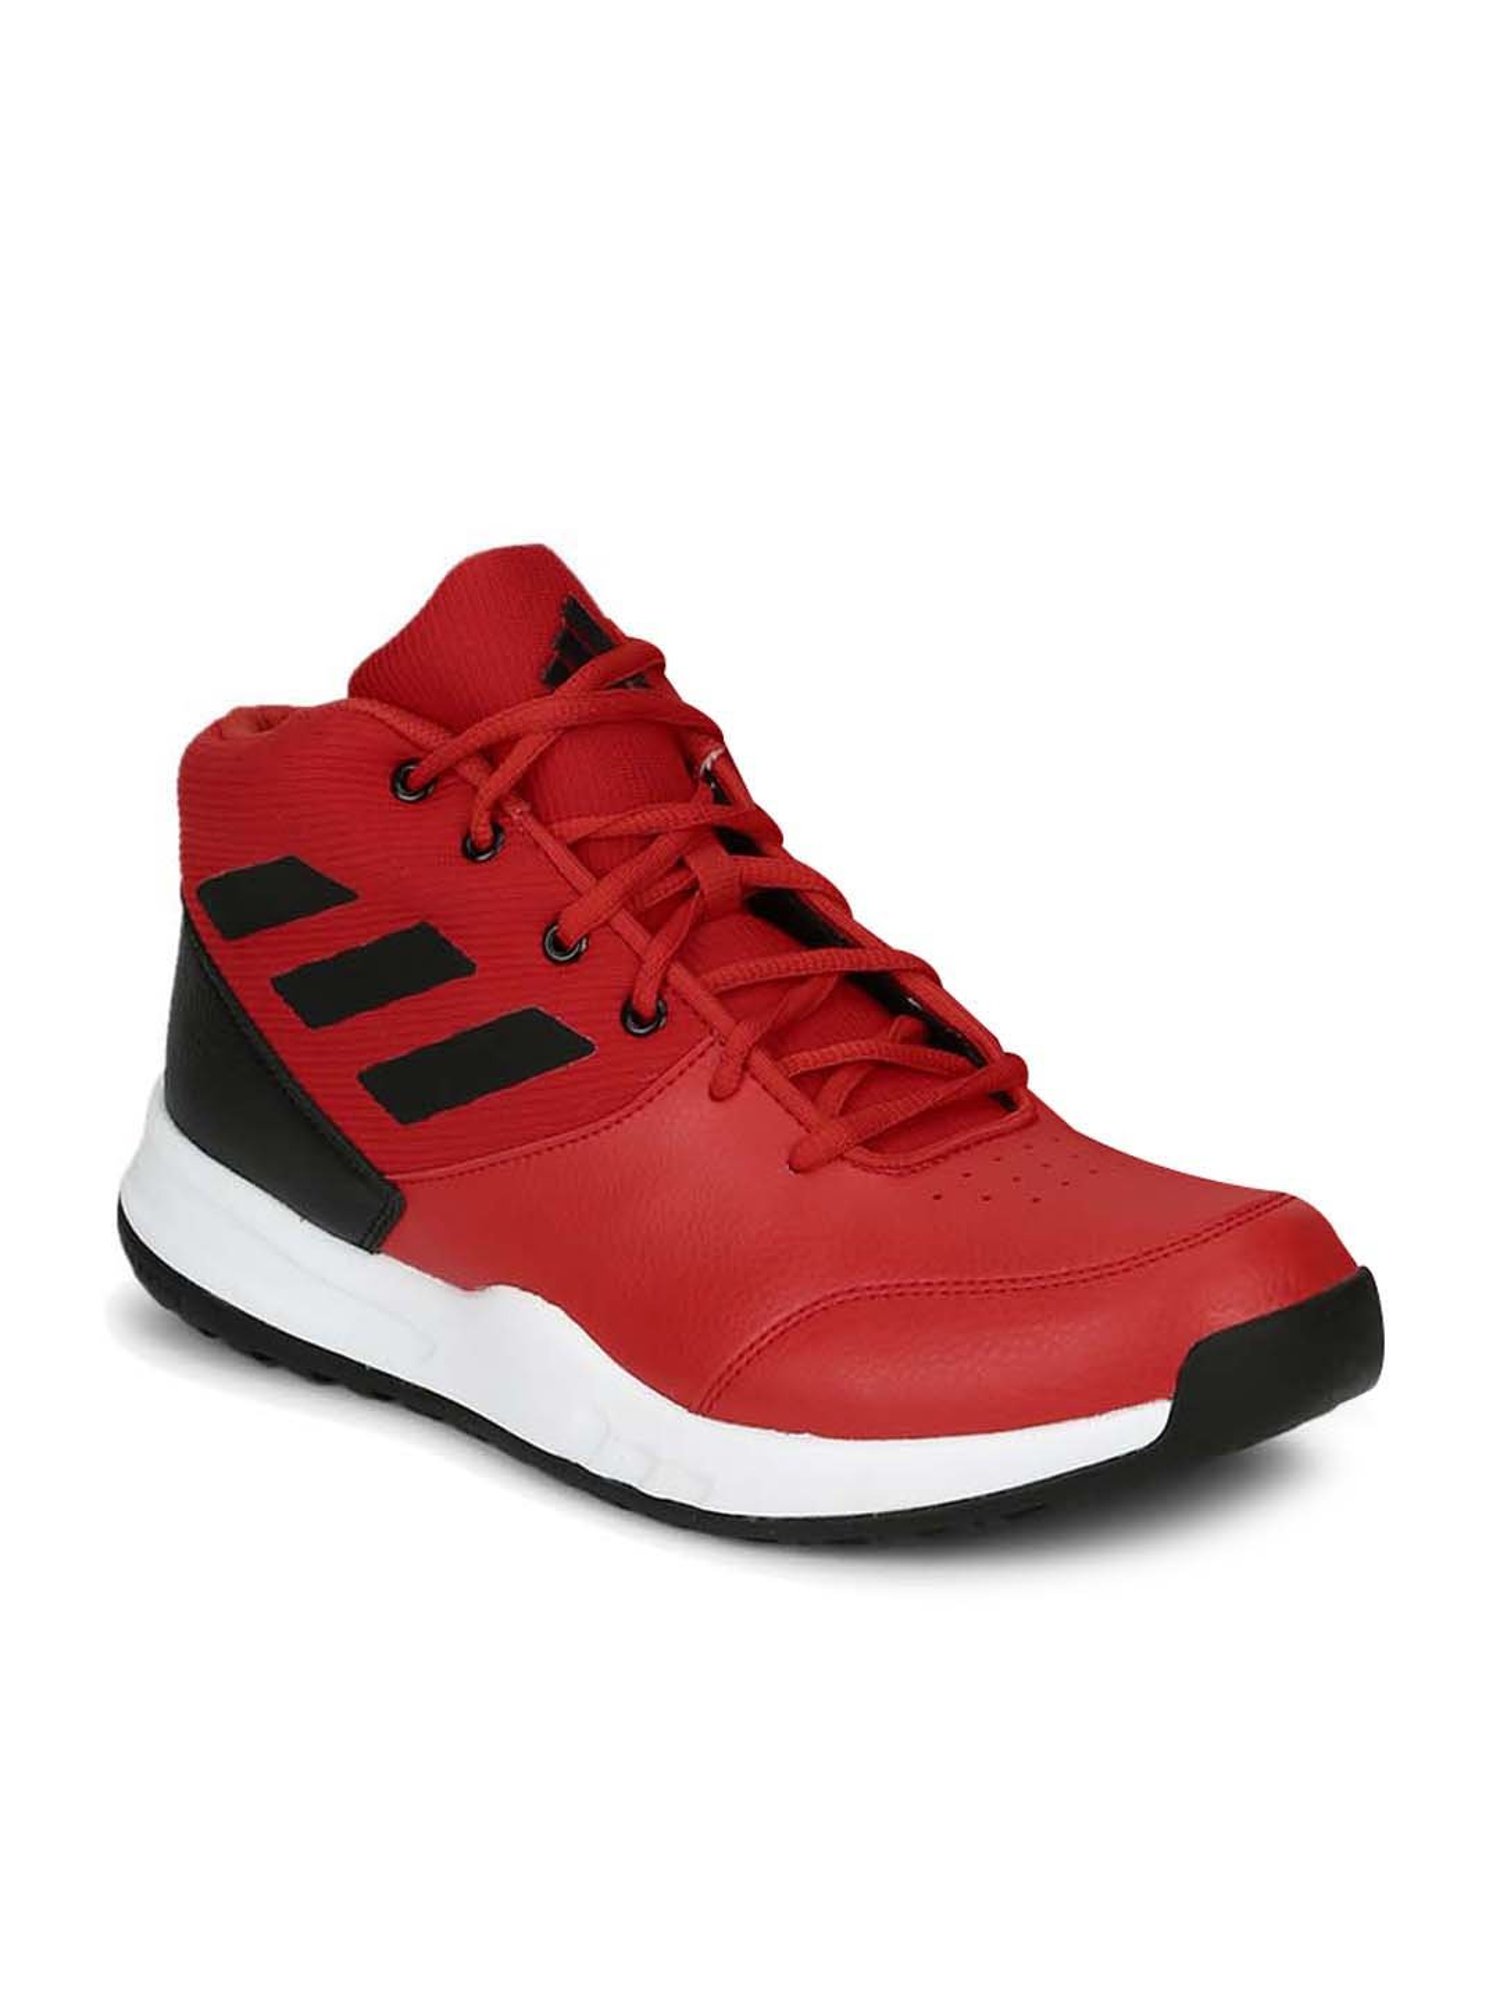 Buy Adidas Own The Game Black Basketball Shoes for Men at Best Price @ Tata  CLiQ